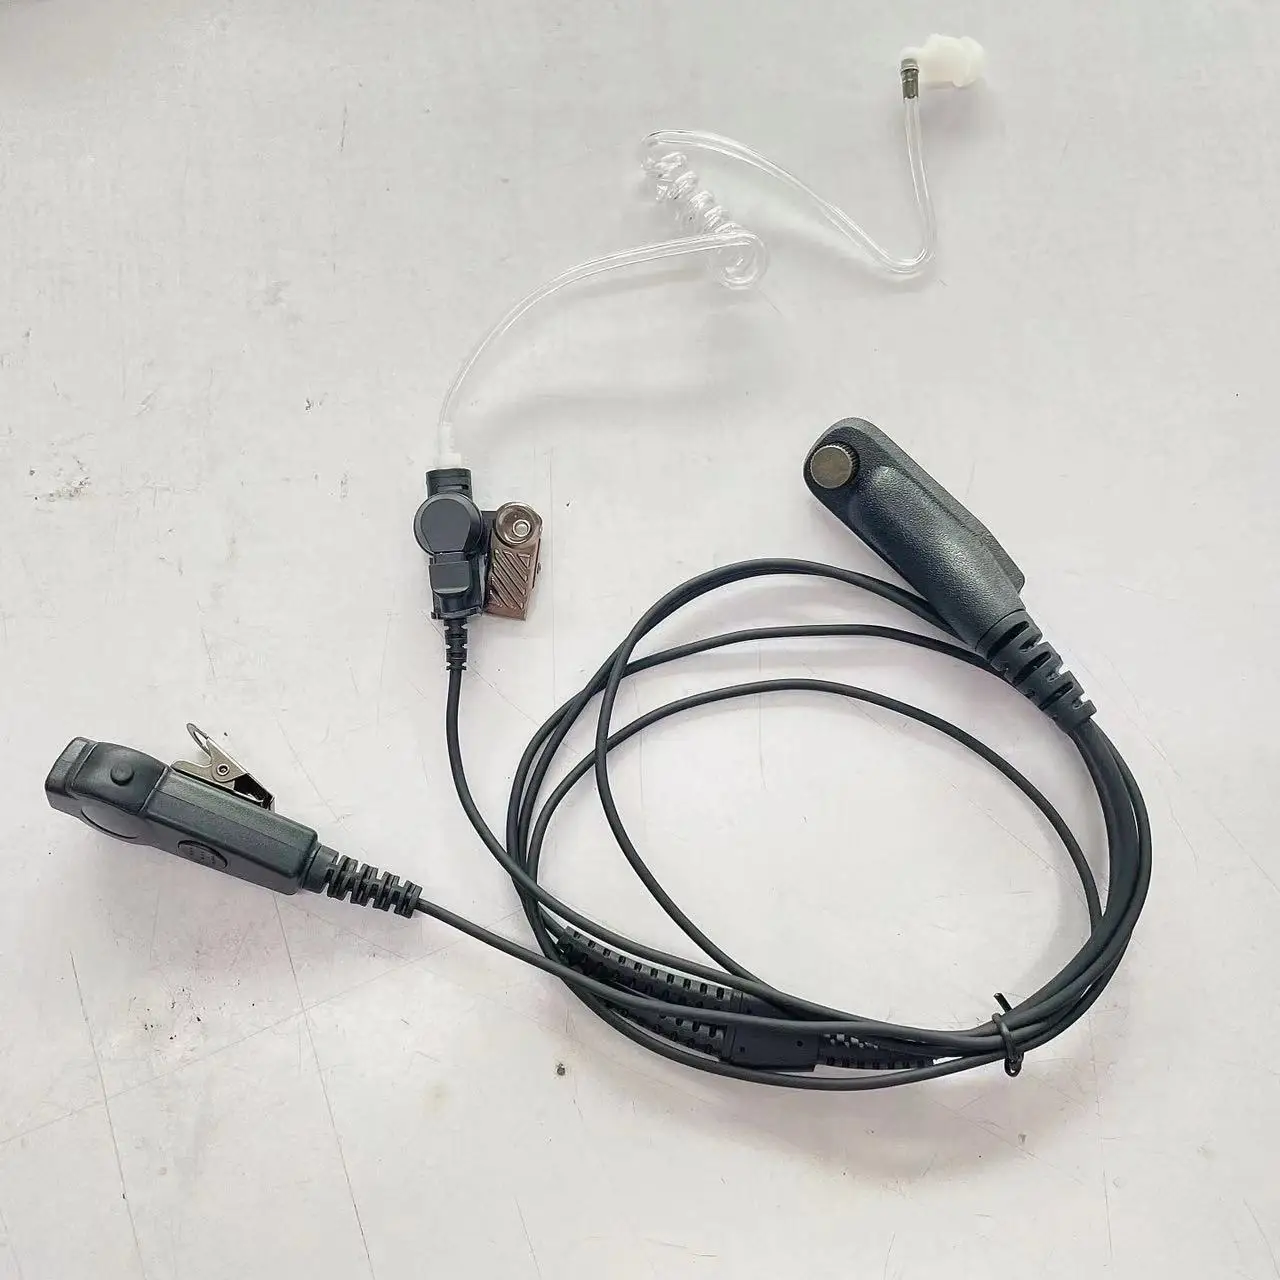 Motorola XPR 7550e Earpiece, G Shape Headset and Mic for Motorola APX4000 APX6000 APX8000 APX900